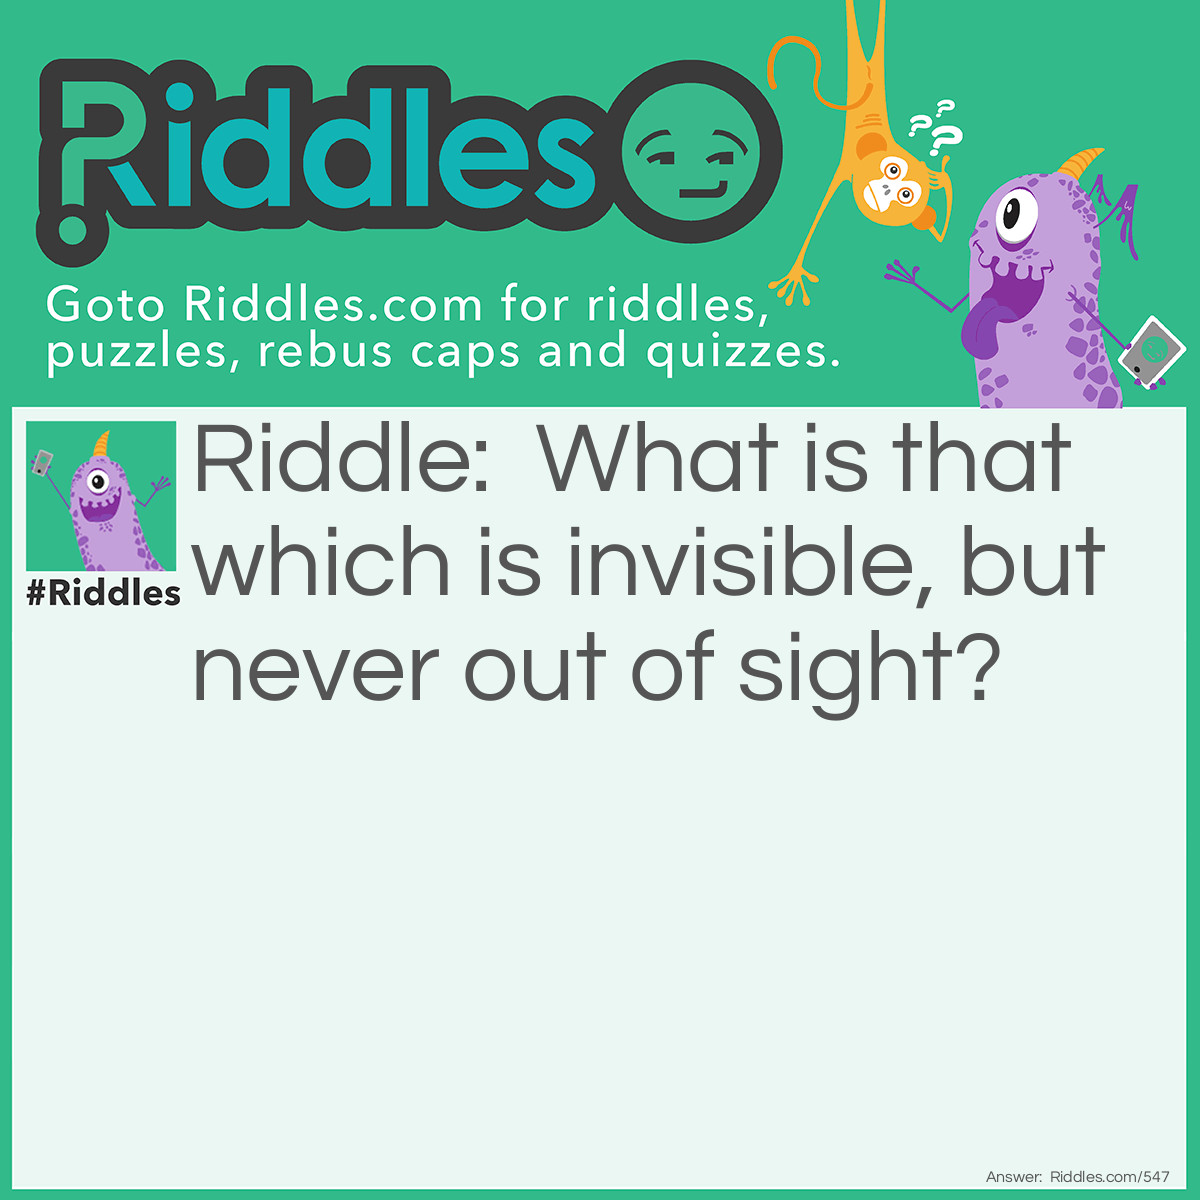 Riddle: What is that which is invisible, but never out of sight? Answer: The Letter I.